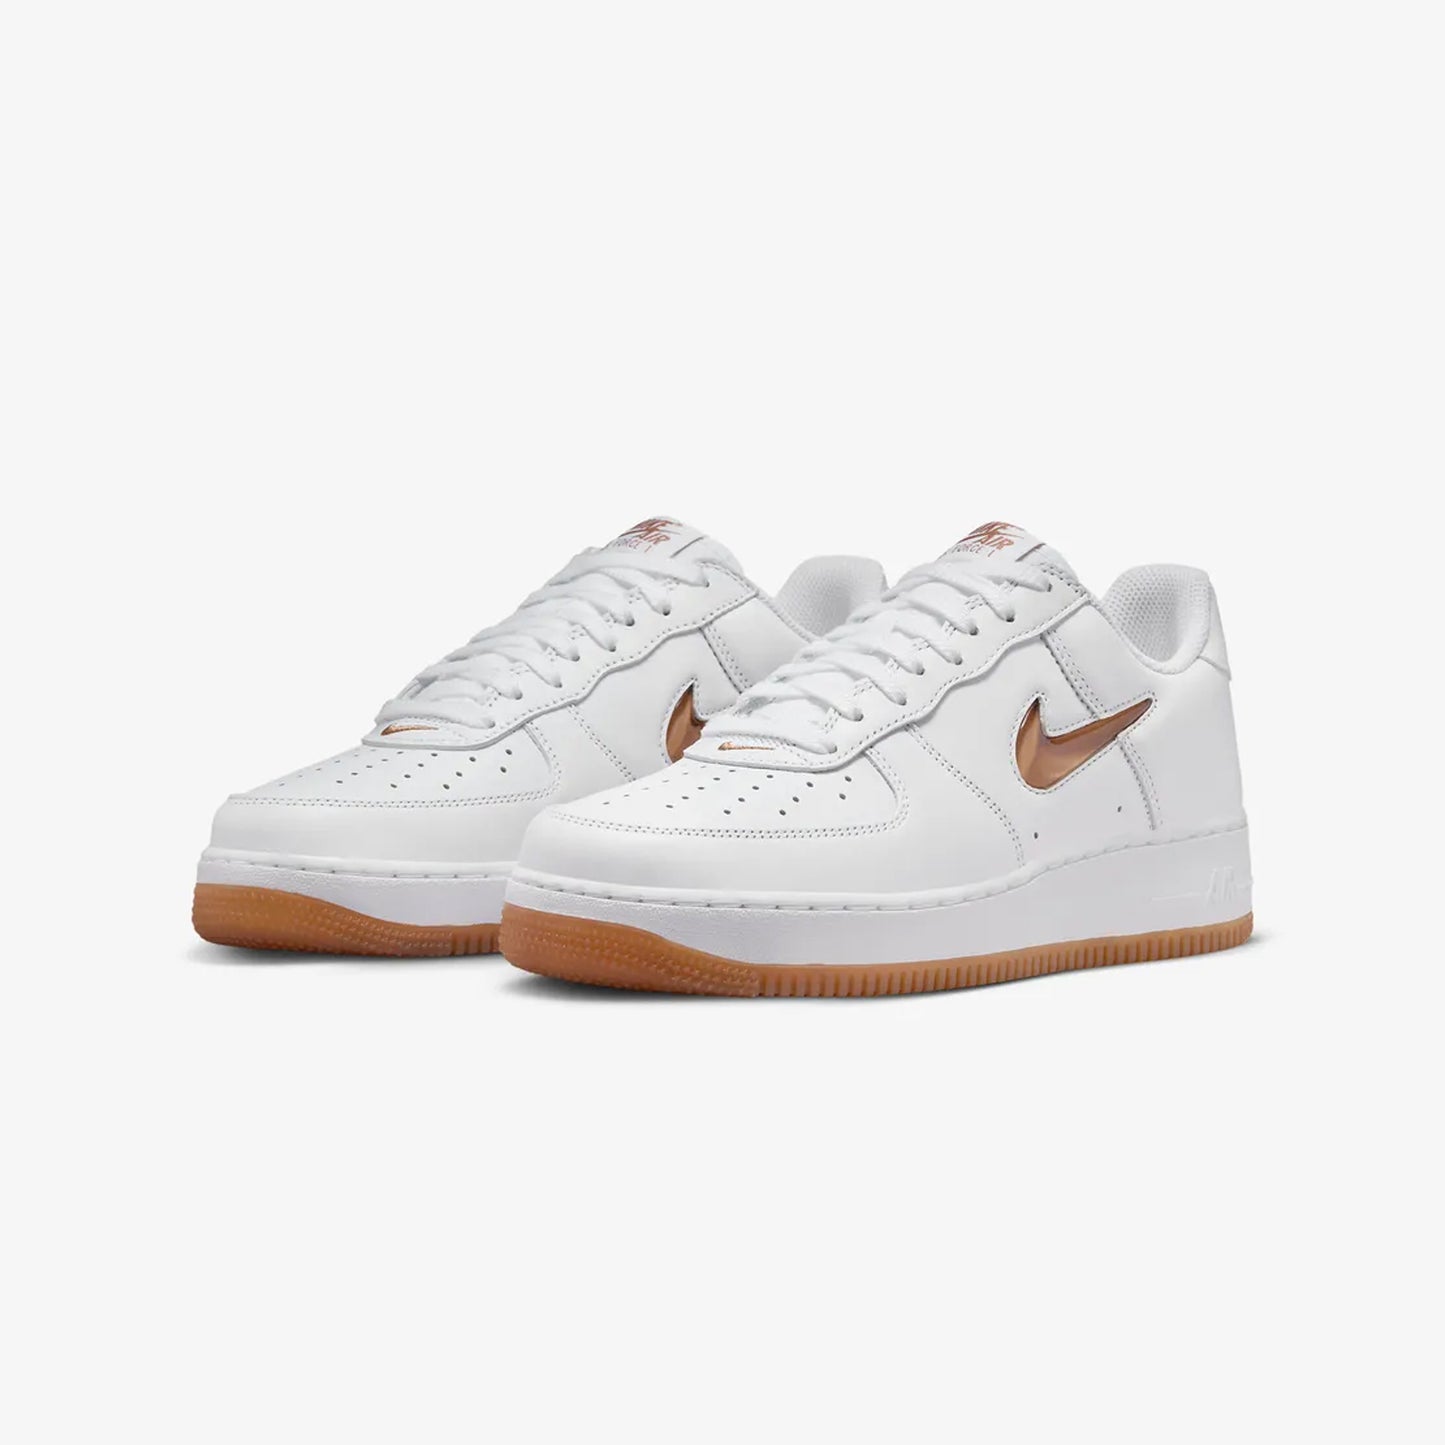 AIR FORCE 1 LOW RETRO 'WHITE/GUM MED BROWN'